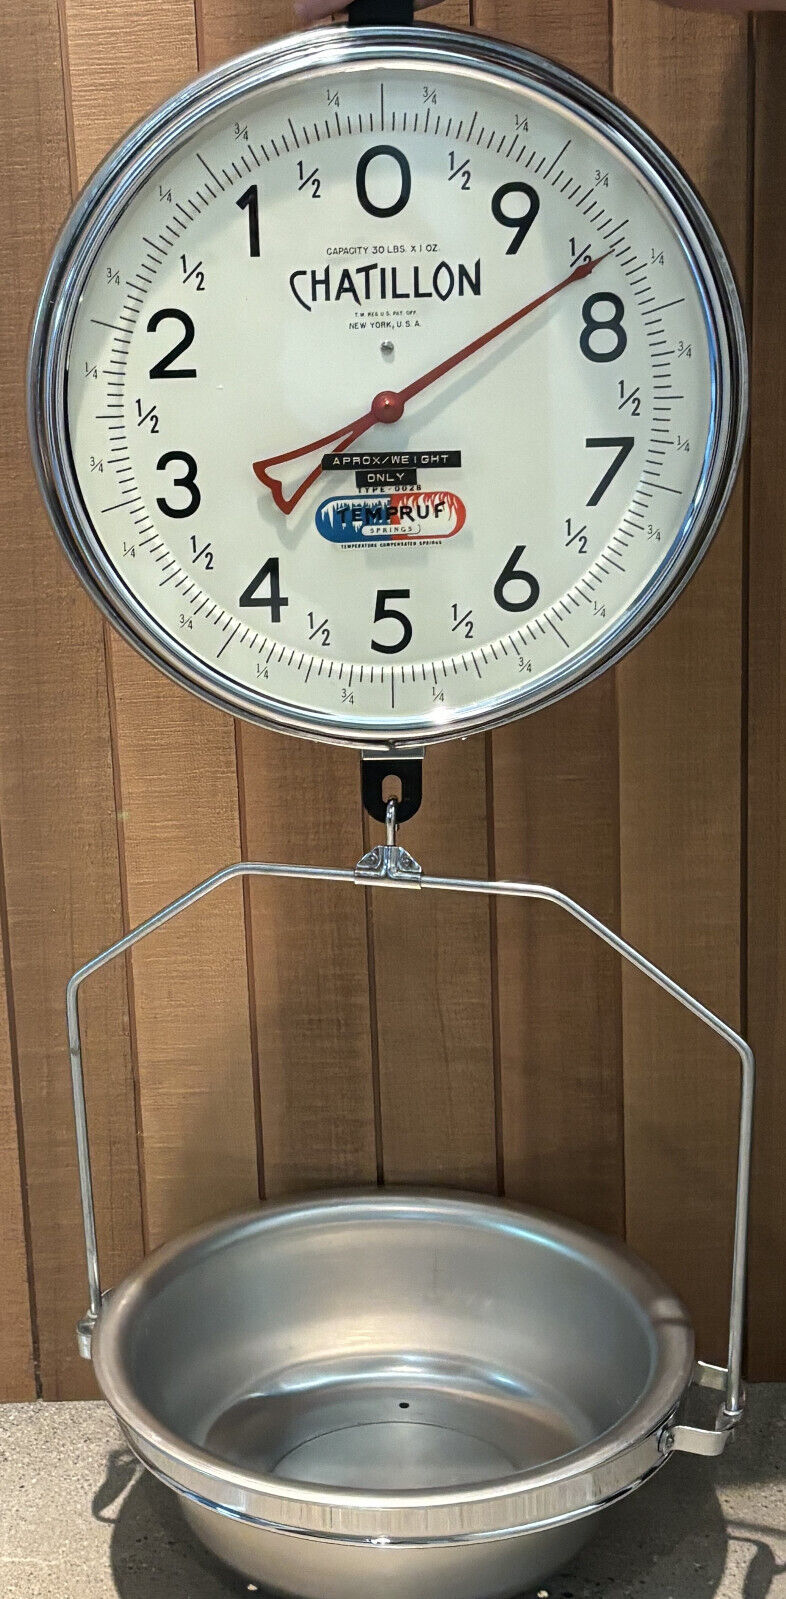 Vintage Grocery Produce Hanging Chatillon Scale with Tub